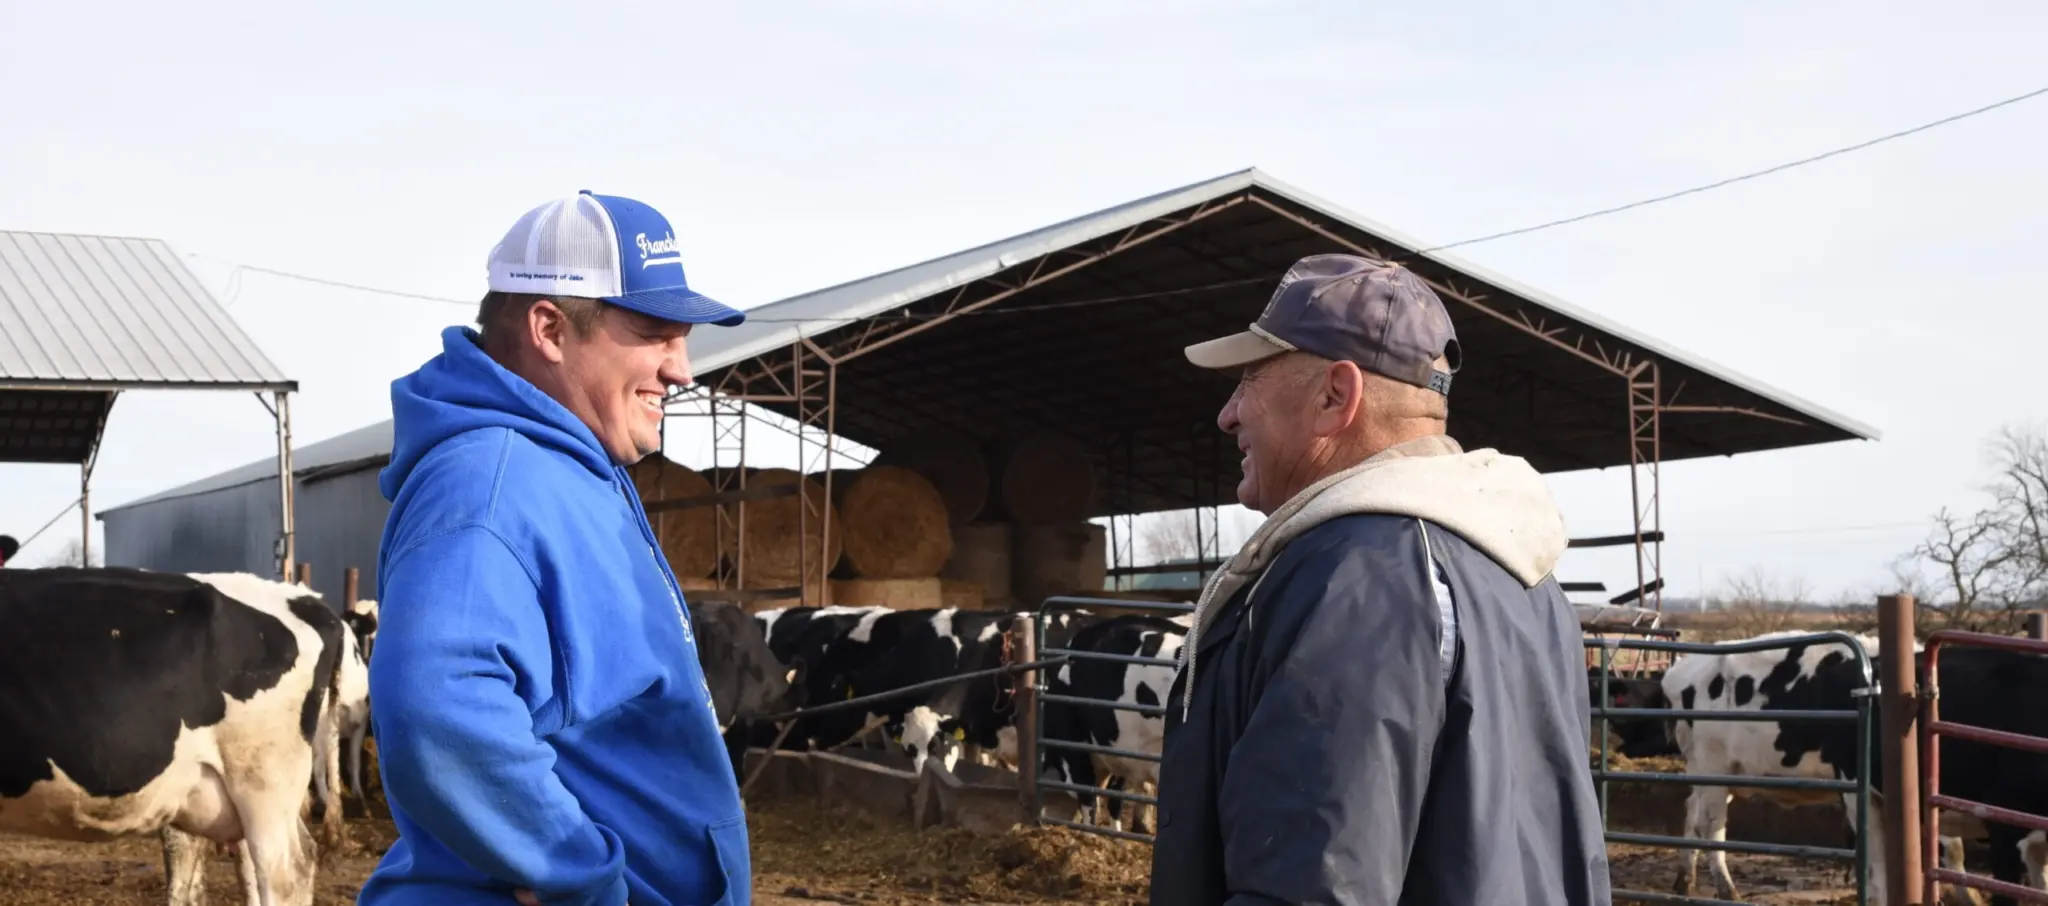 Two farmers talk in front of a cow pen.